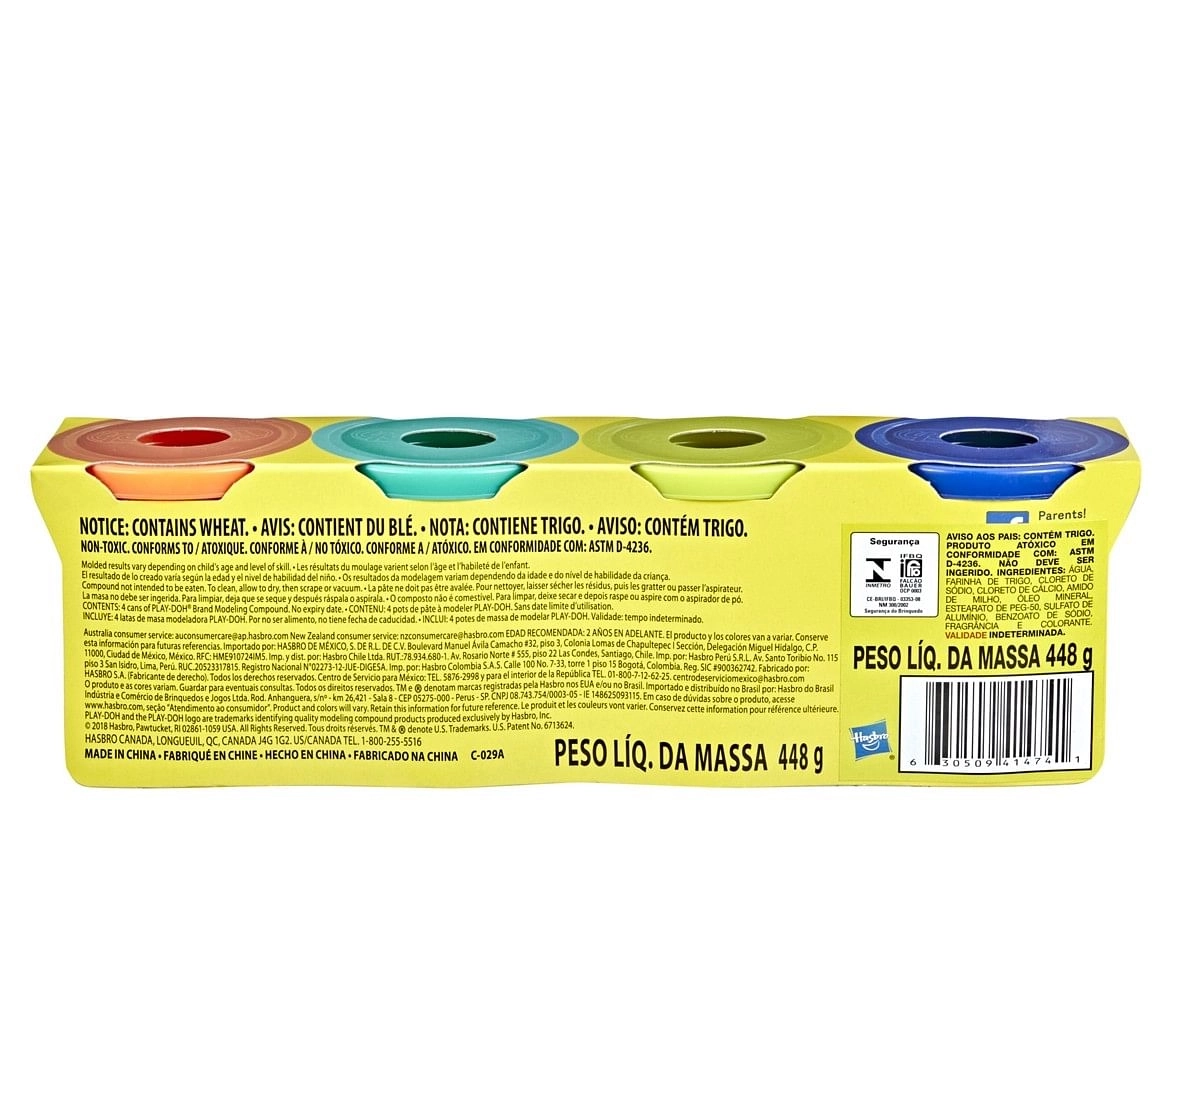 Play Doh 4 Pack of 4 Ounces Color Assortment Multicolor 2Y+